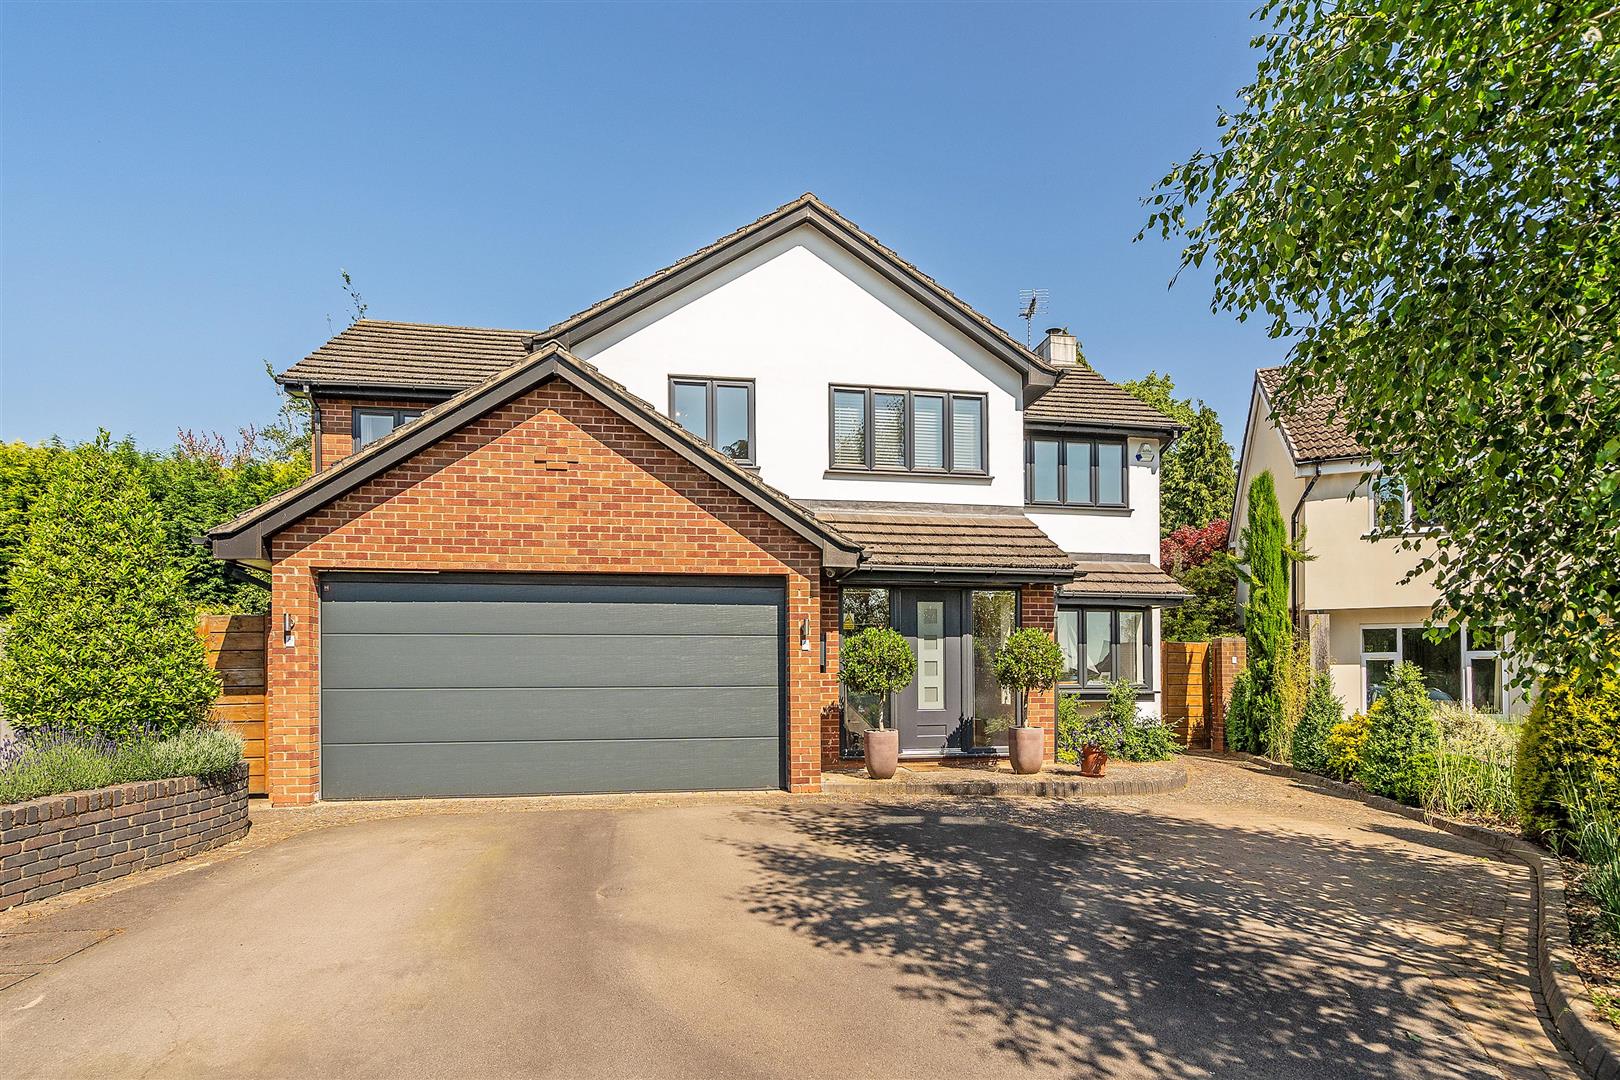 5 bed detached house for sale in Oakley Wood Drive, Solihull  - Property Image 1